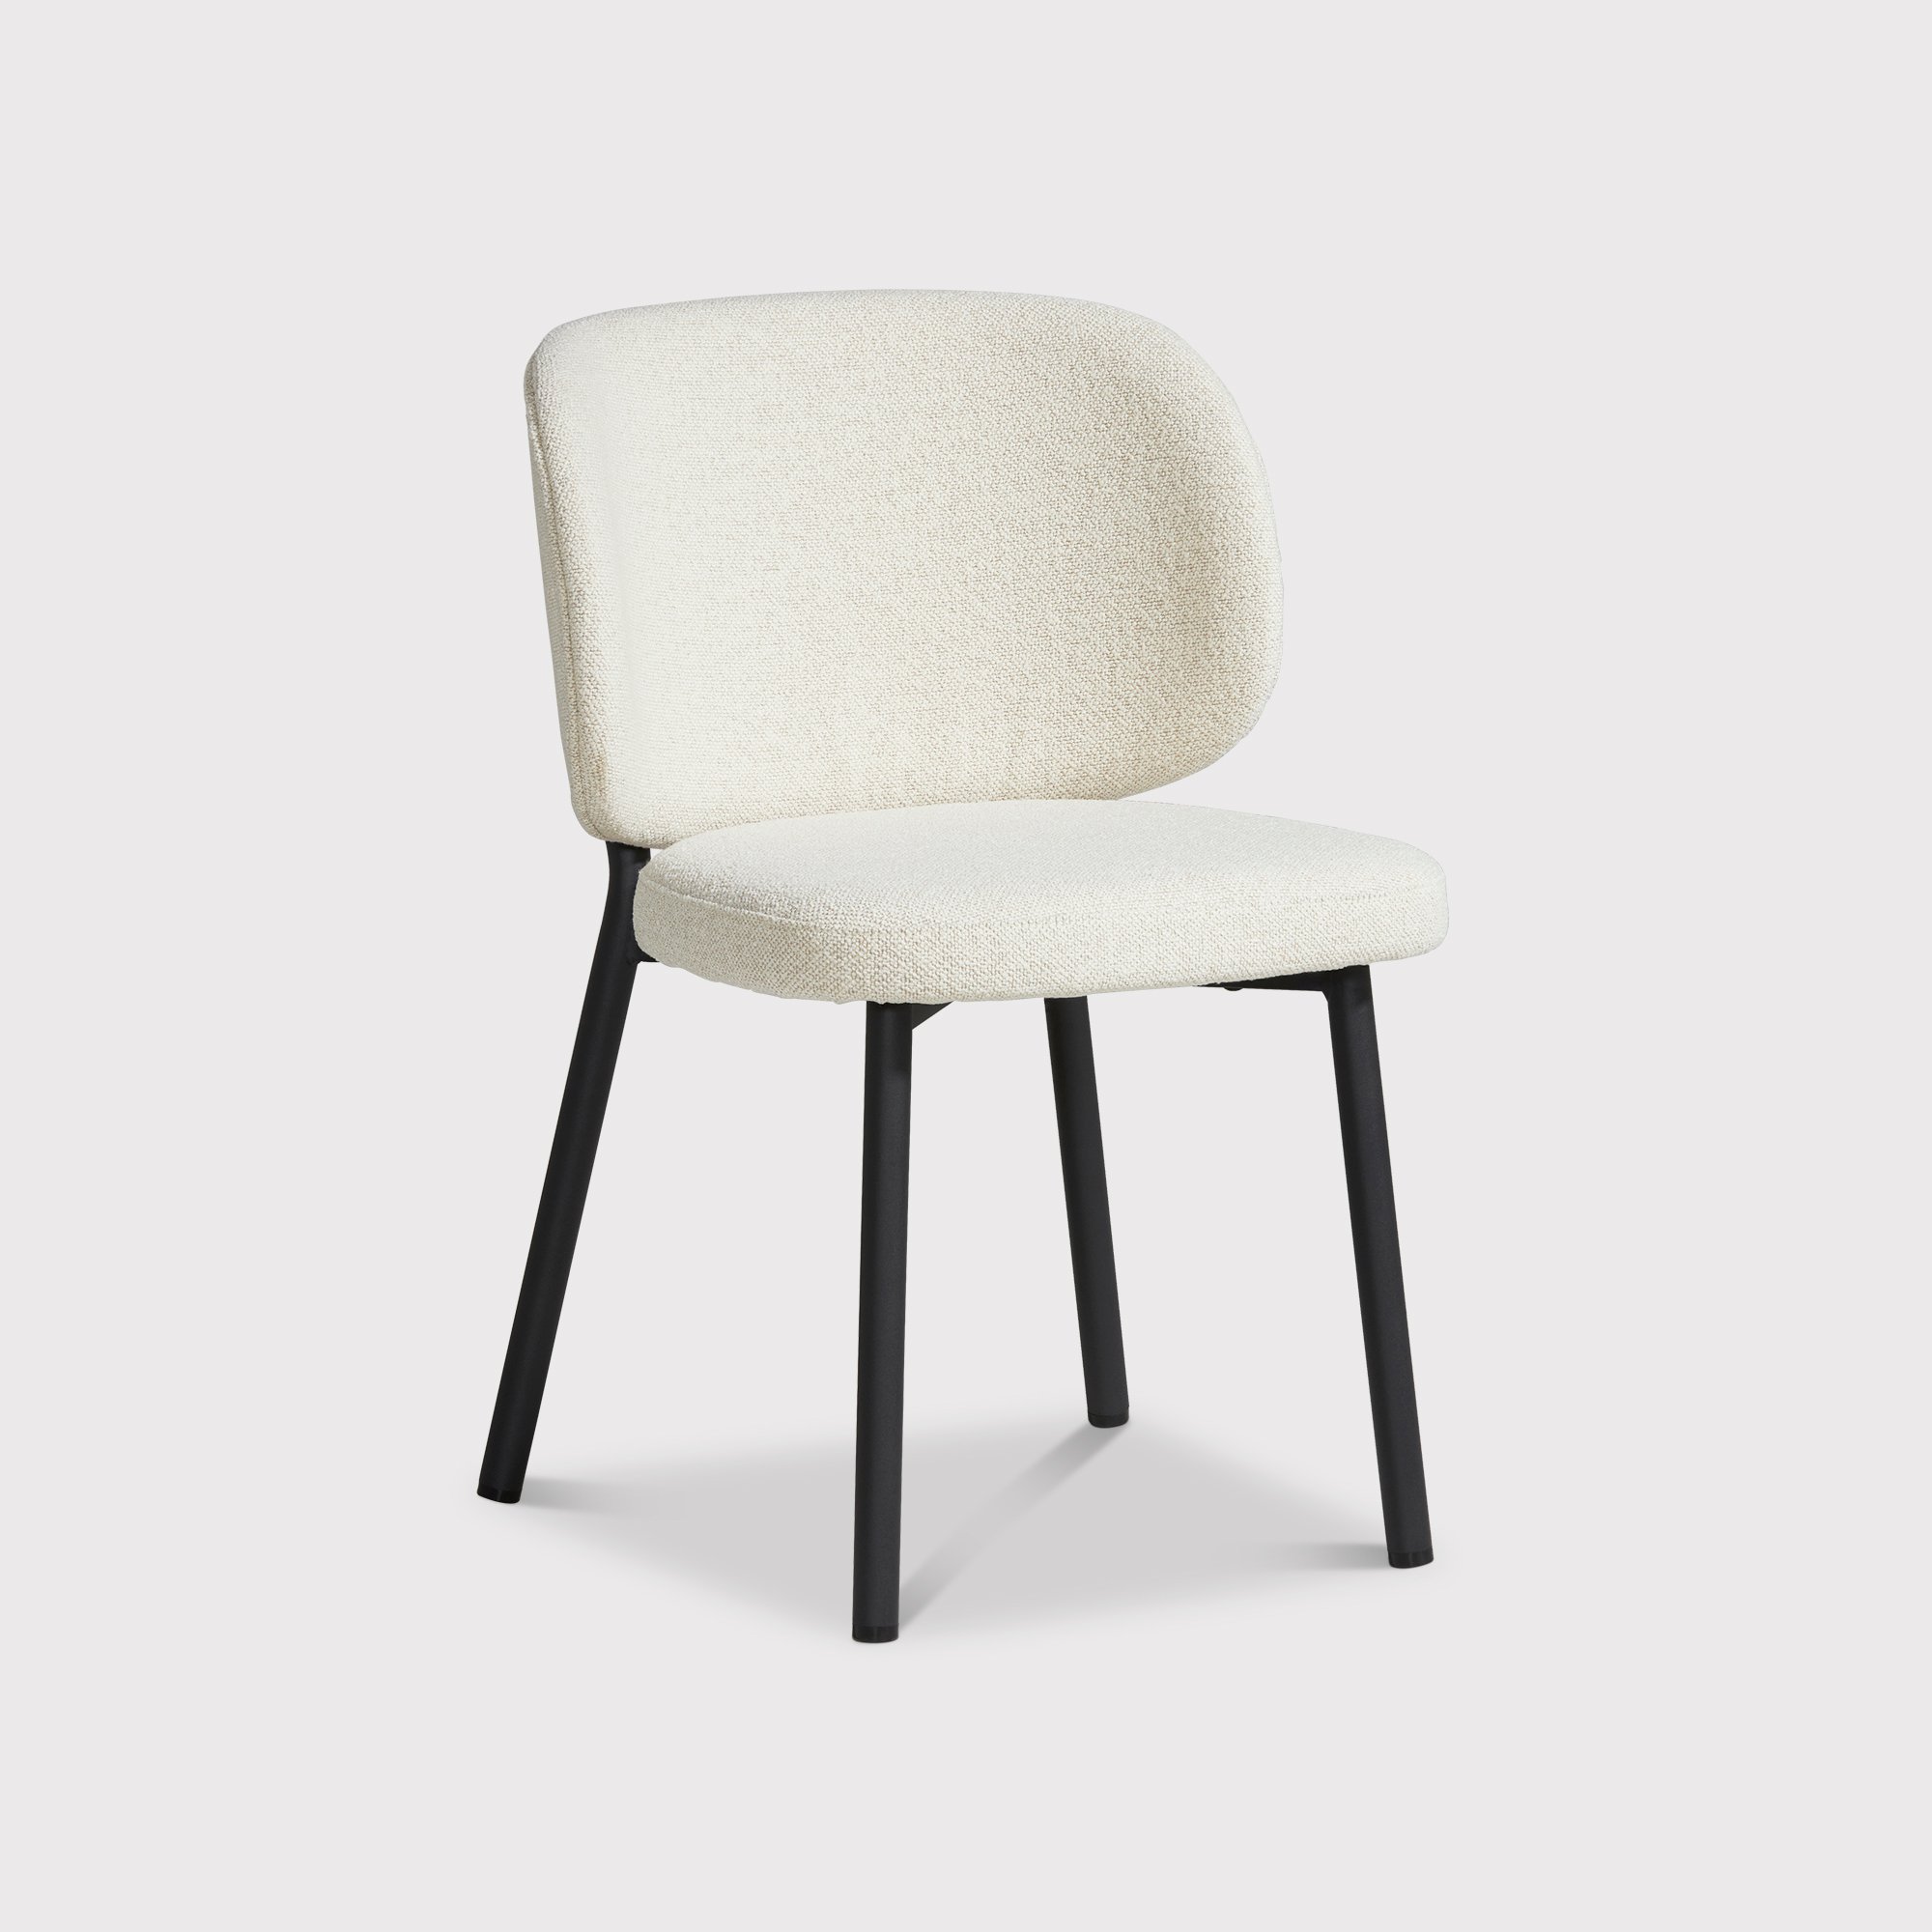 Elodie Dining Chair, Neutral Boucle | Barker & Stonehouse